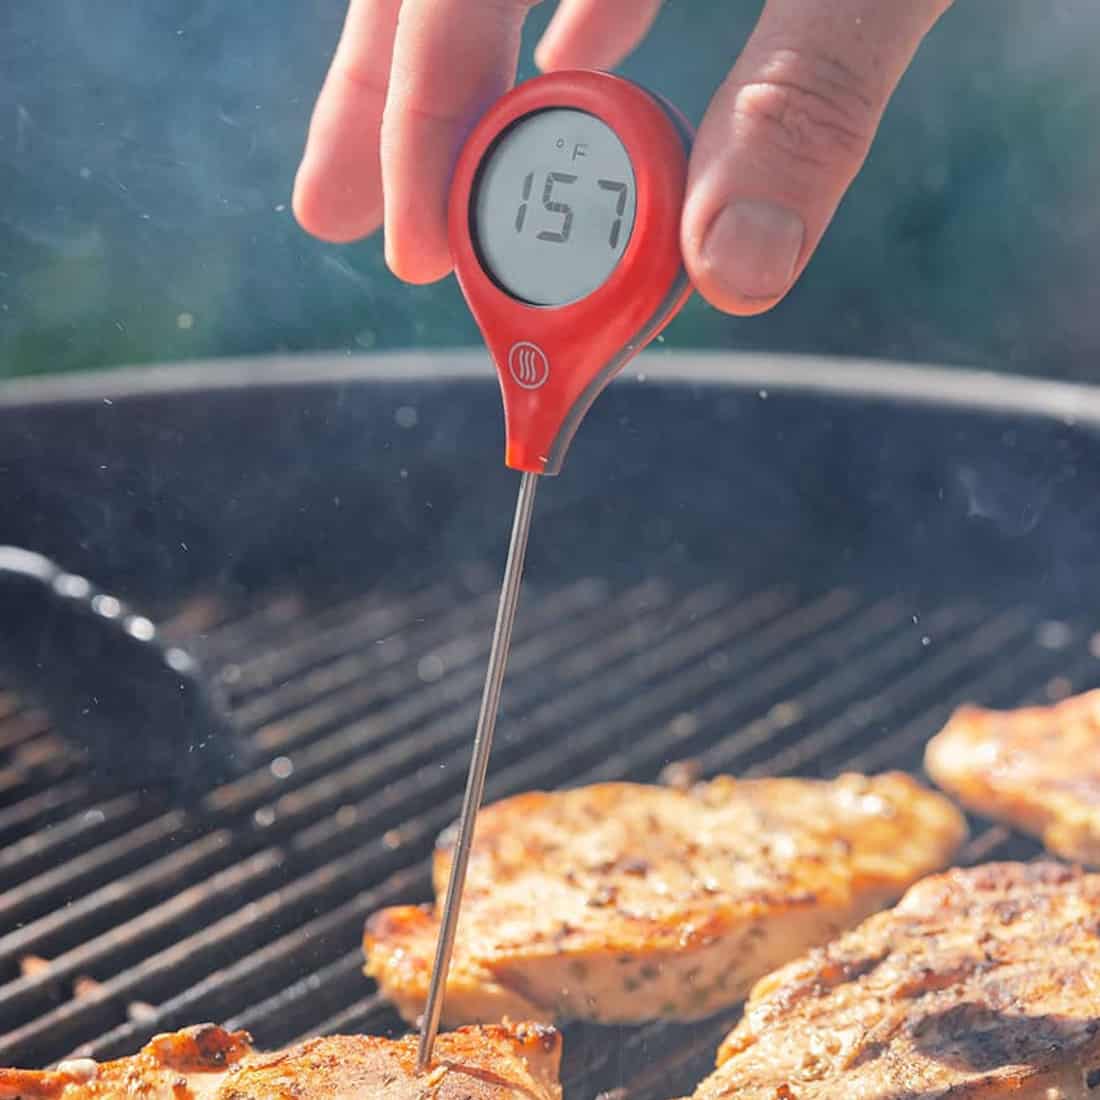 ThermowWorks ThermoPop 2 thermometer taking the temperature of some meat on a grill.